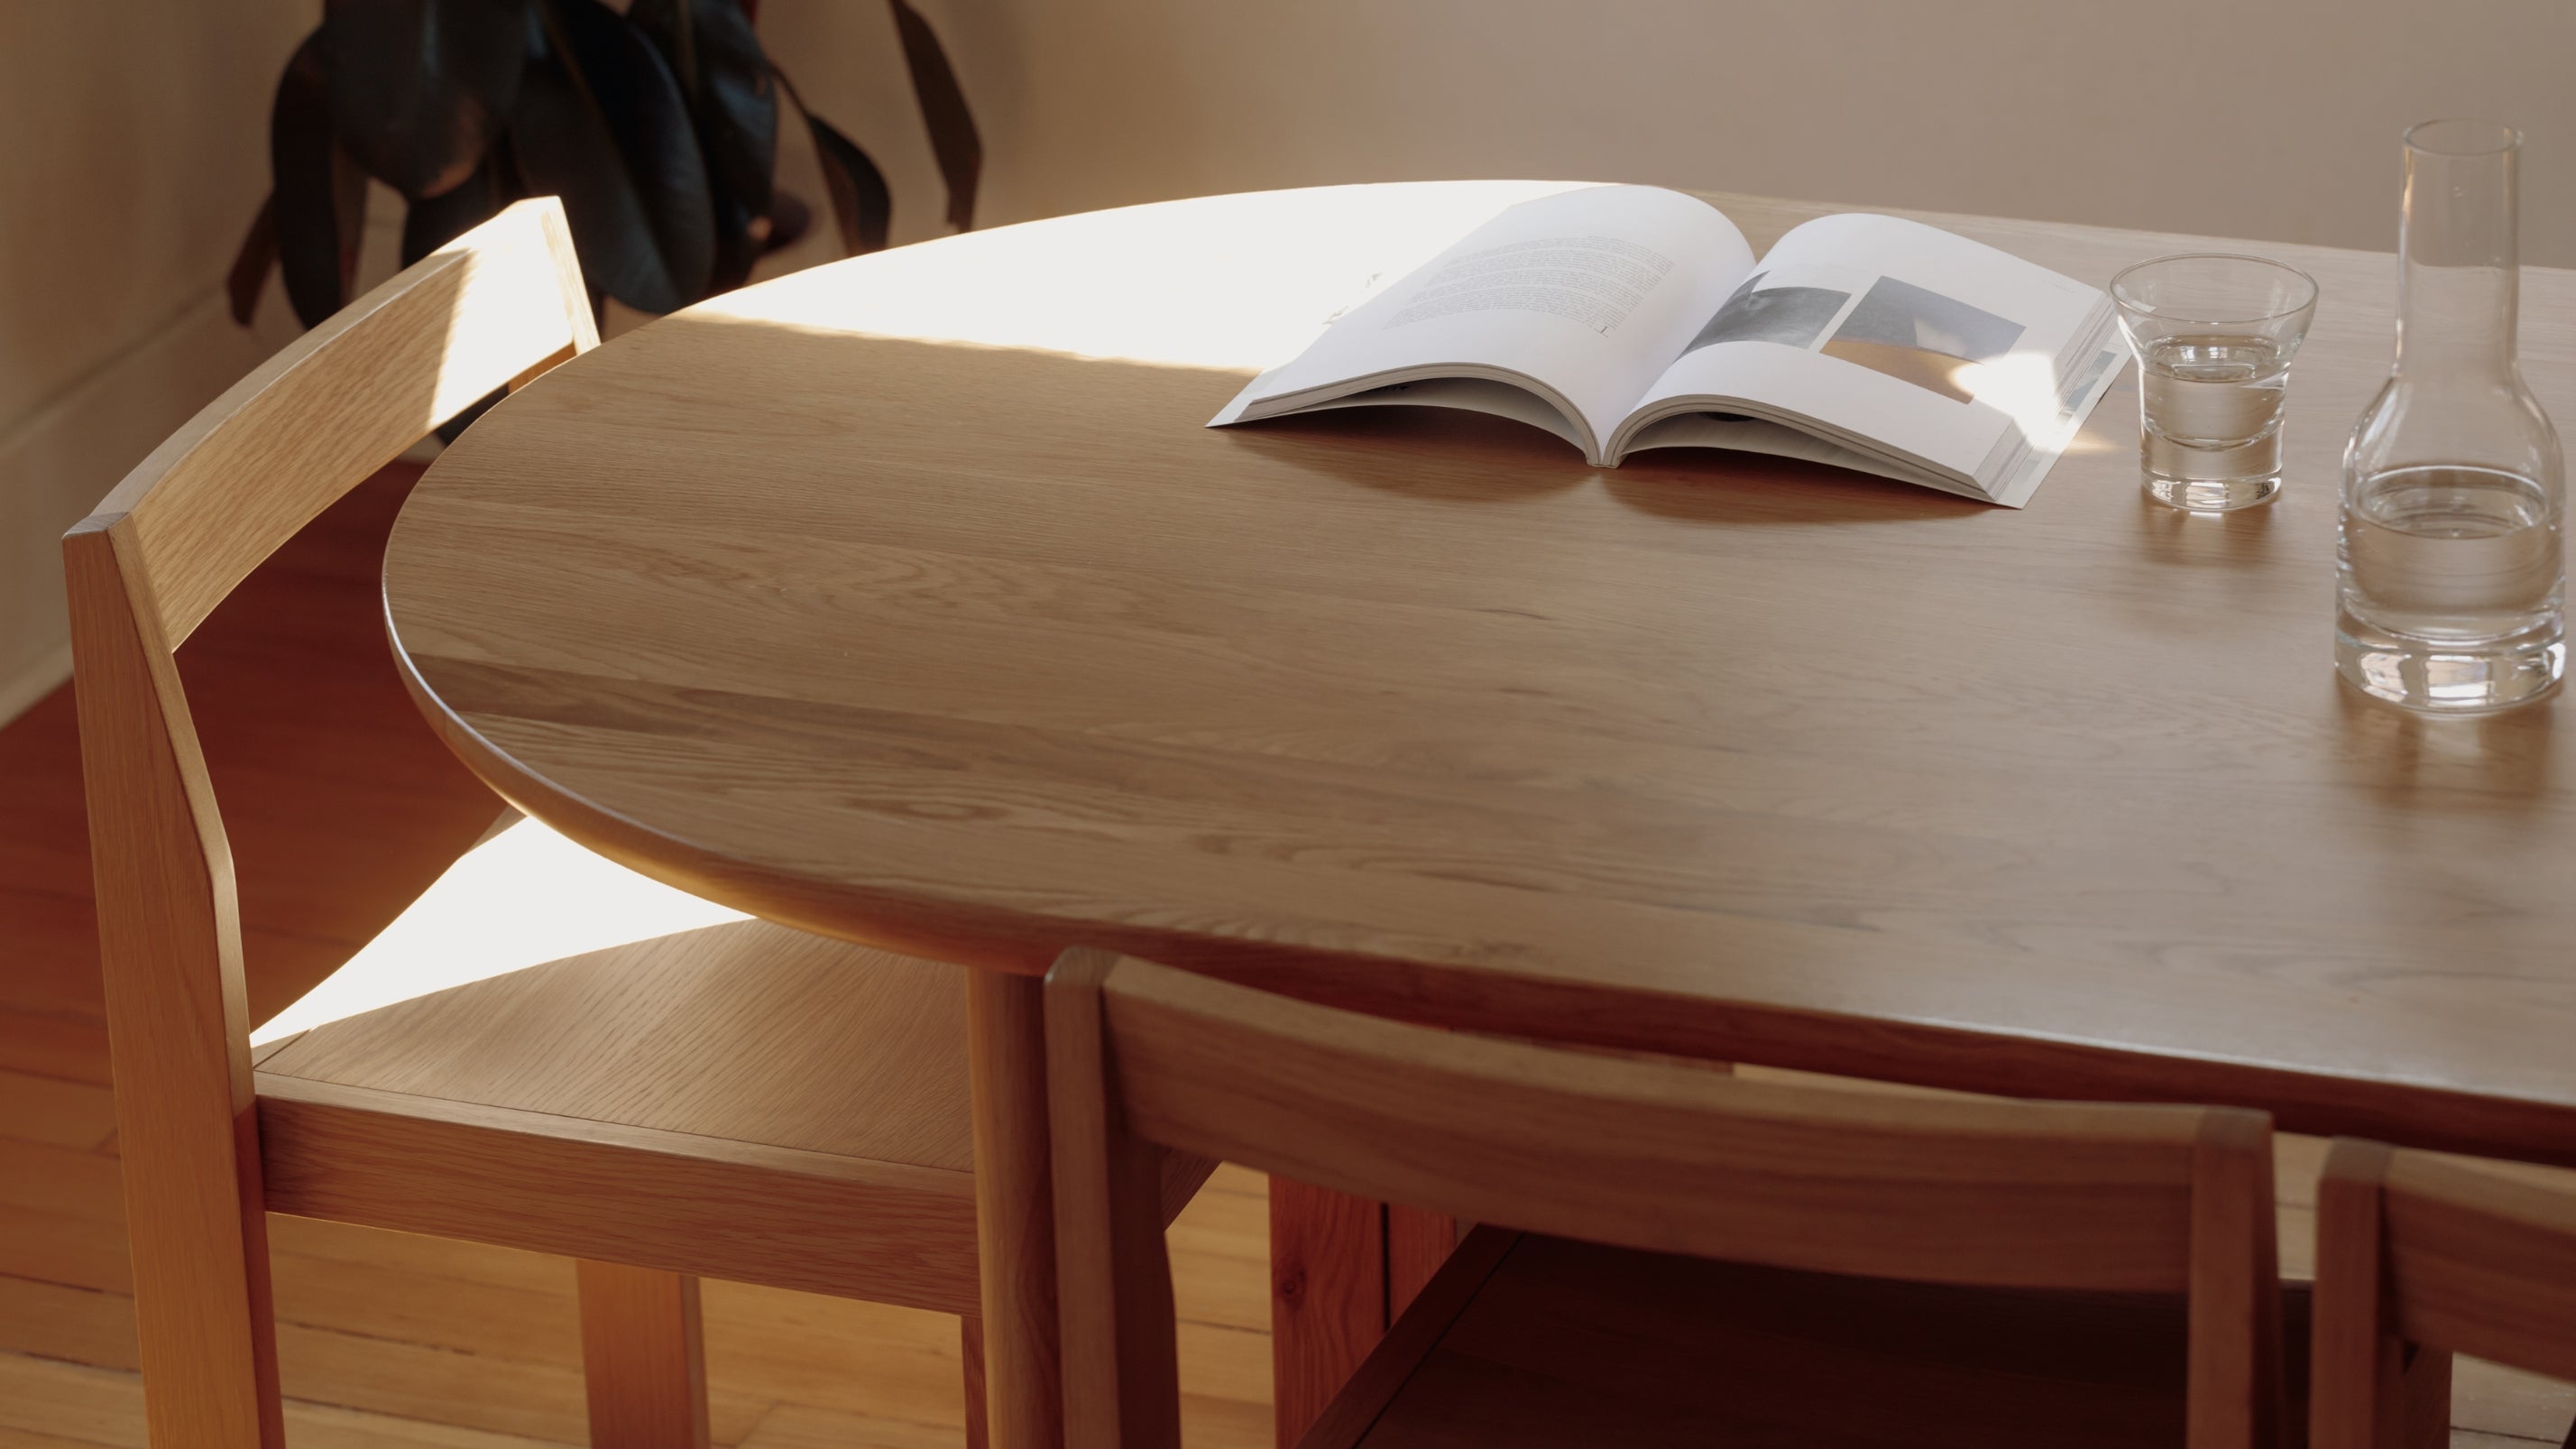 Track Dining Table, Seats 6-8 People, Oak - Image 2